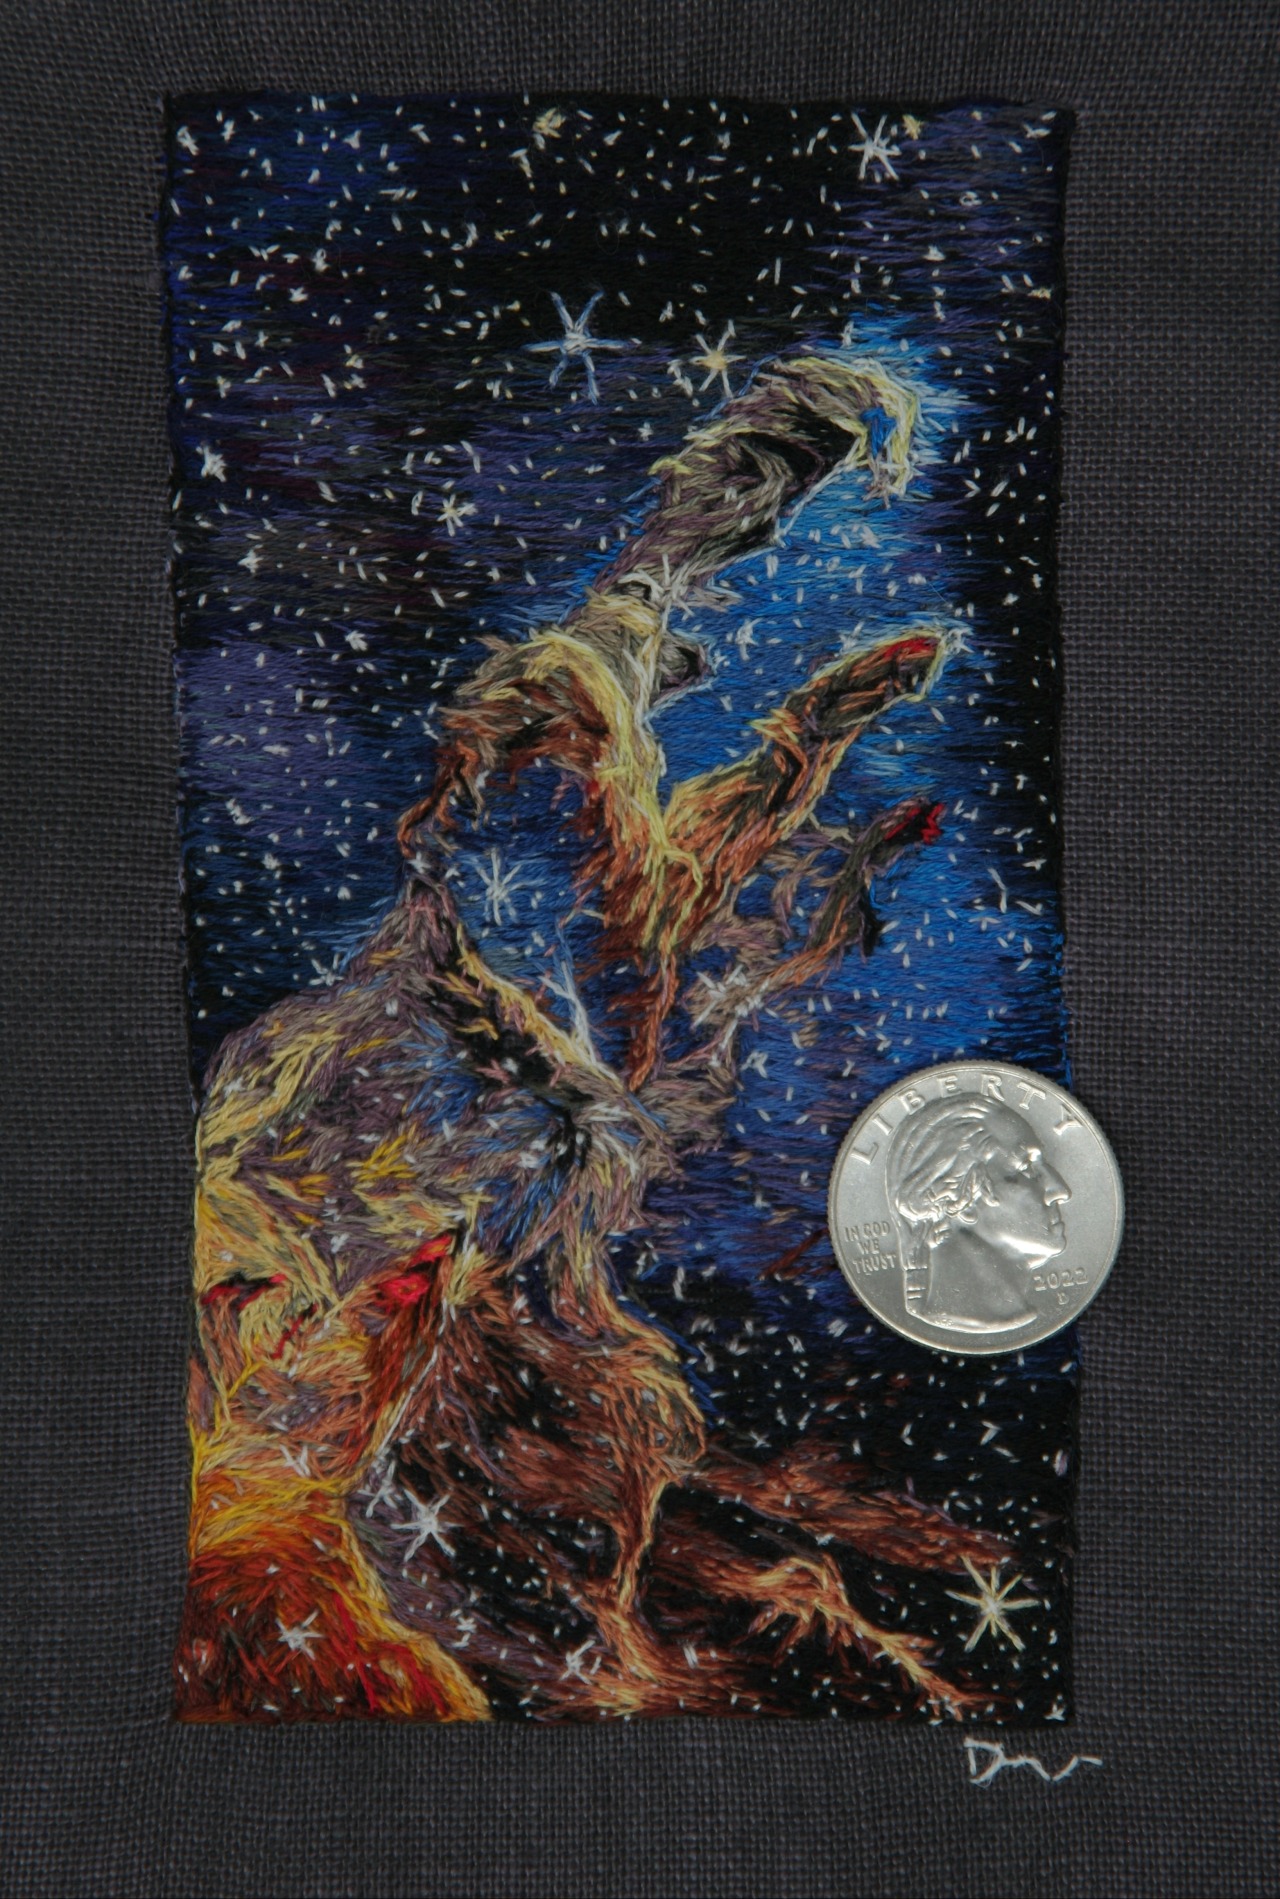 This rectangular piece shows another embroidered interpretation of the Pillars of Creation captured by the Webb Telescope last year. The background is blue and black with white stars scattered from top to bottom. In the middle, three pillars appear in colors of red and yellow. The pillars, which lean to the right, continue downward to the left of the art piece. Credit: Darci Lenker of Darci Lenker Art